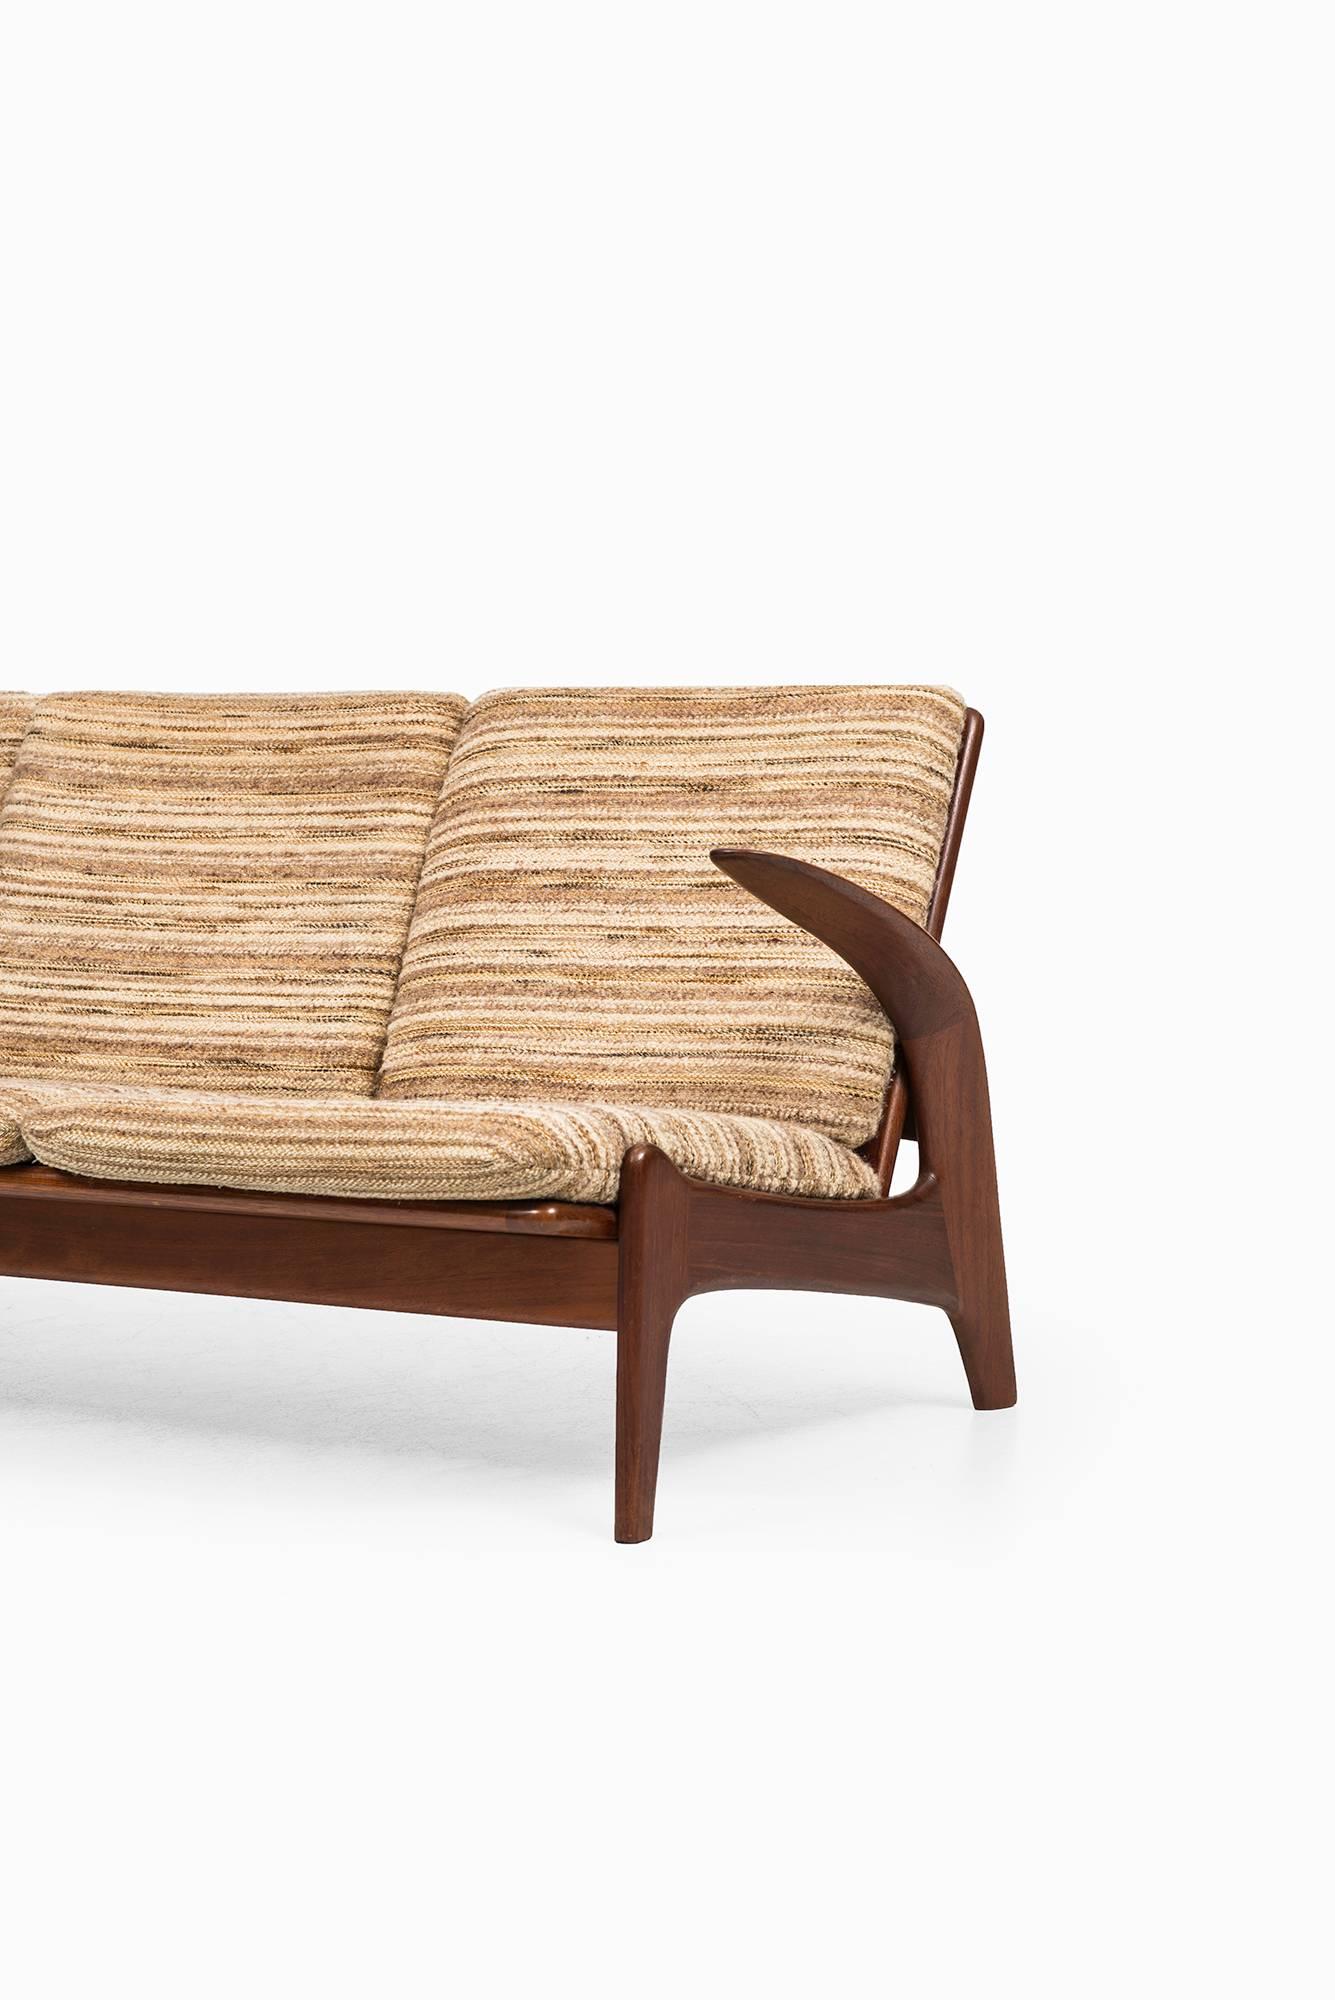 Rare sofa designed by Rolf Rastad & Adolf Relling. Produced by Arnestad Bruk in Norway.